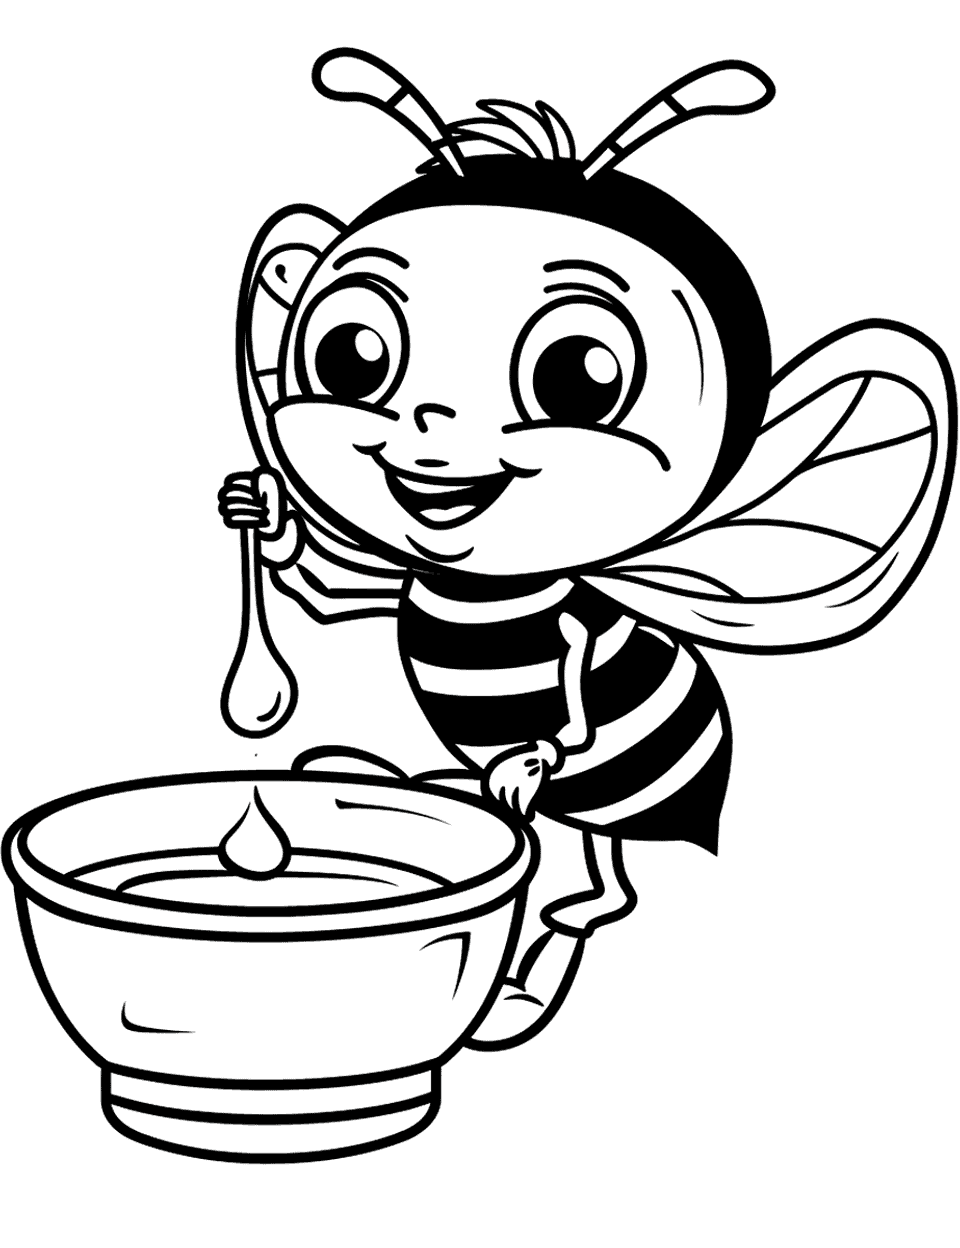 Cartoon Bee and Honey Pot Coloring Page - A cartoonish bee happily dipping into a large pot of honey.